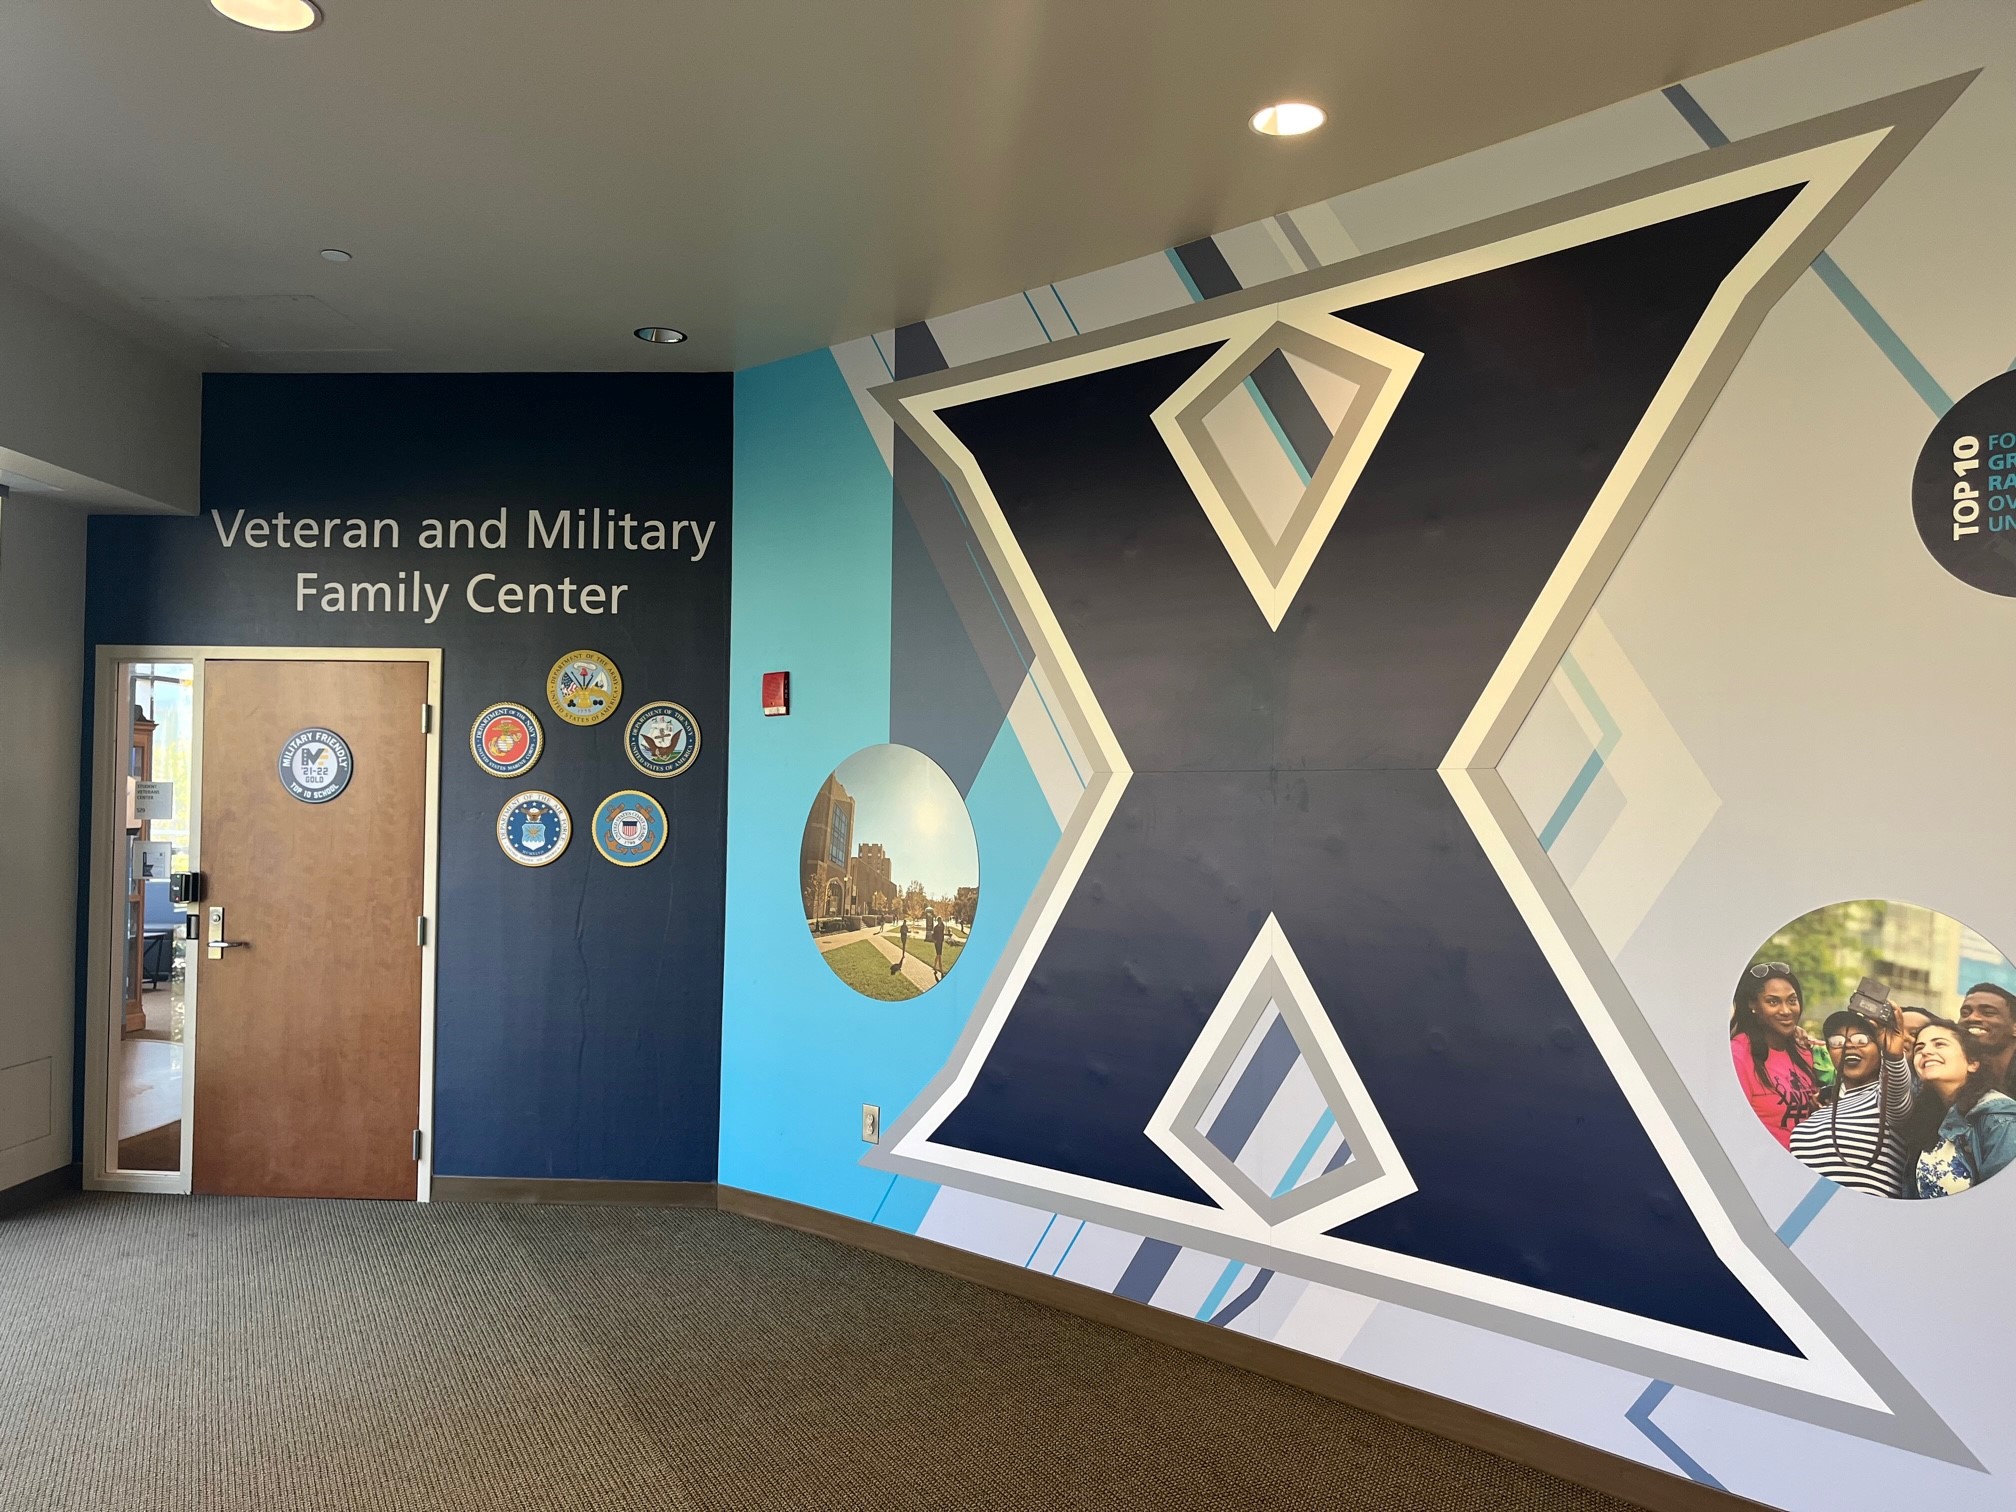 A photo of the interior of the Veteran and Family Military Center at Xavier. Two orange couches are visible. A large Xavier logo is hung on the wall behind the couches.